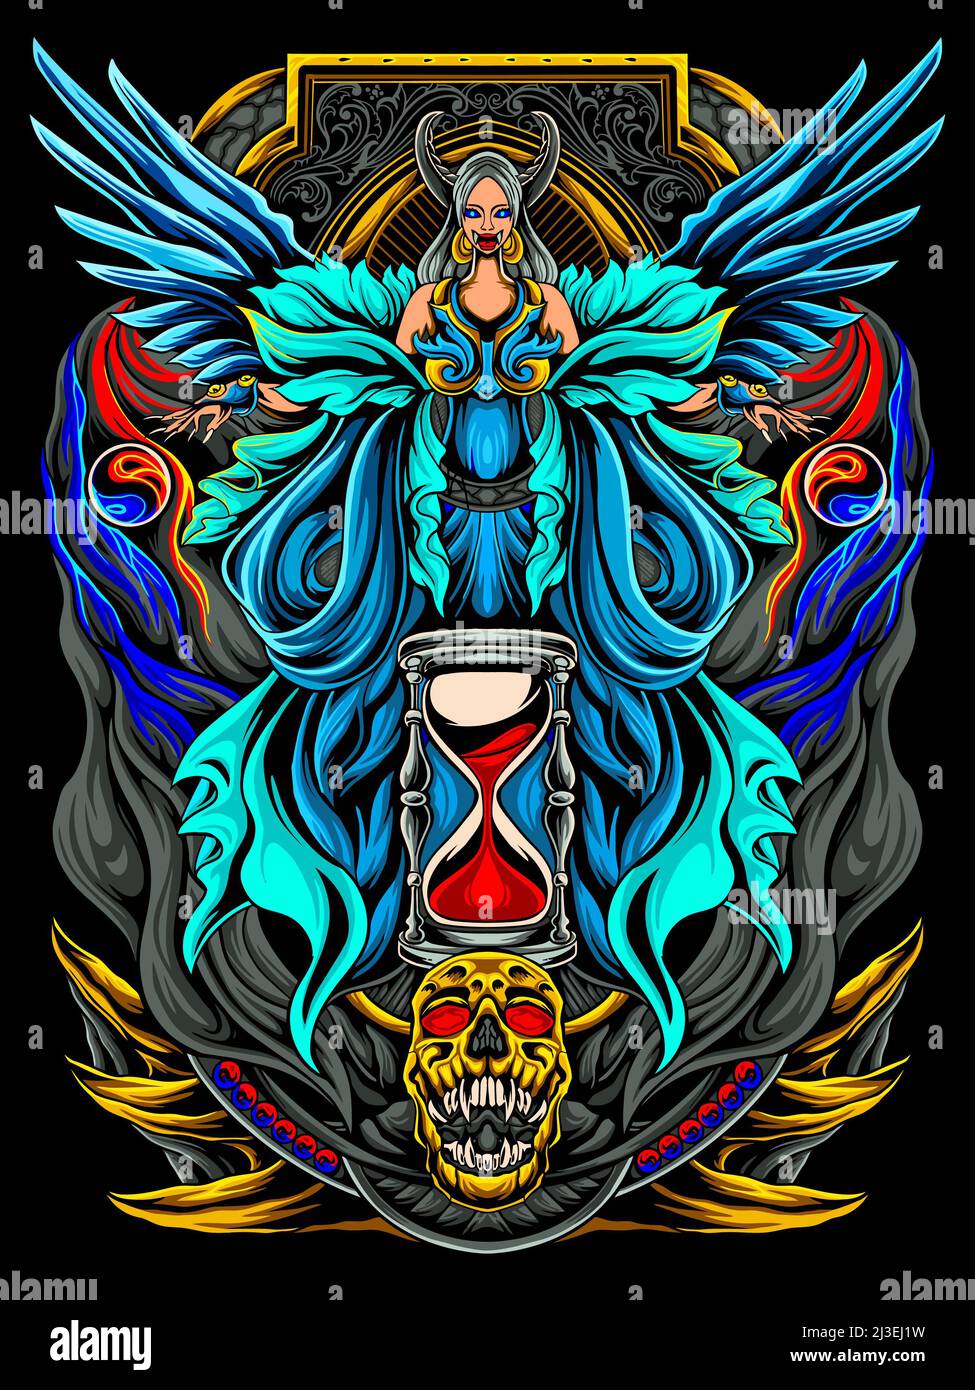 winged angel illustration vector editable color Stock Photo